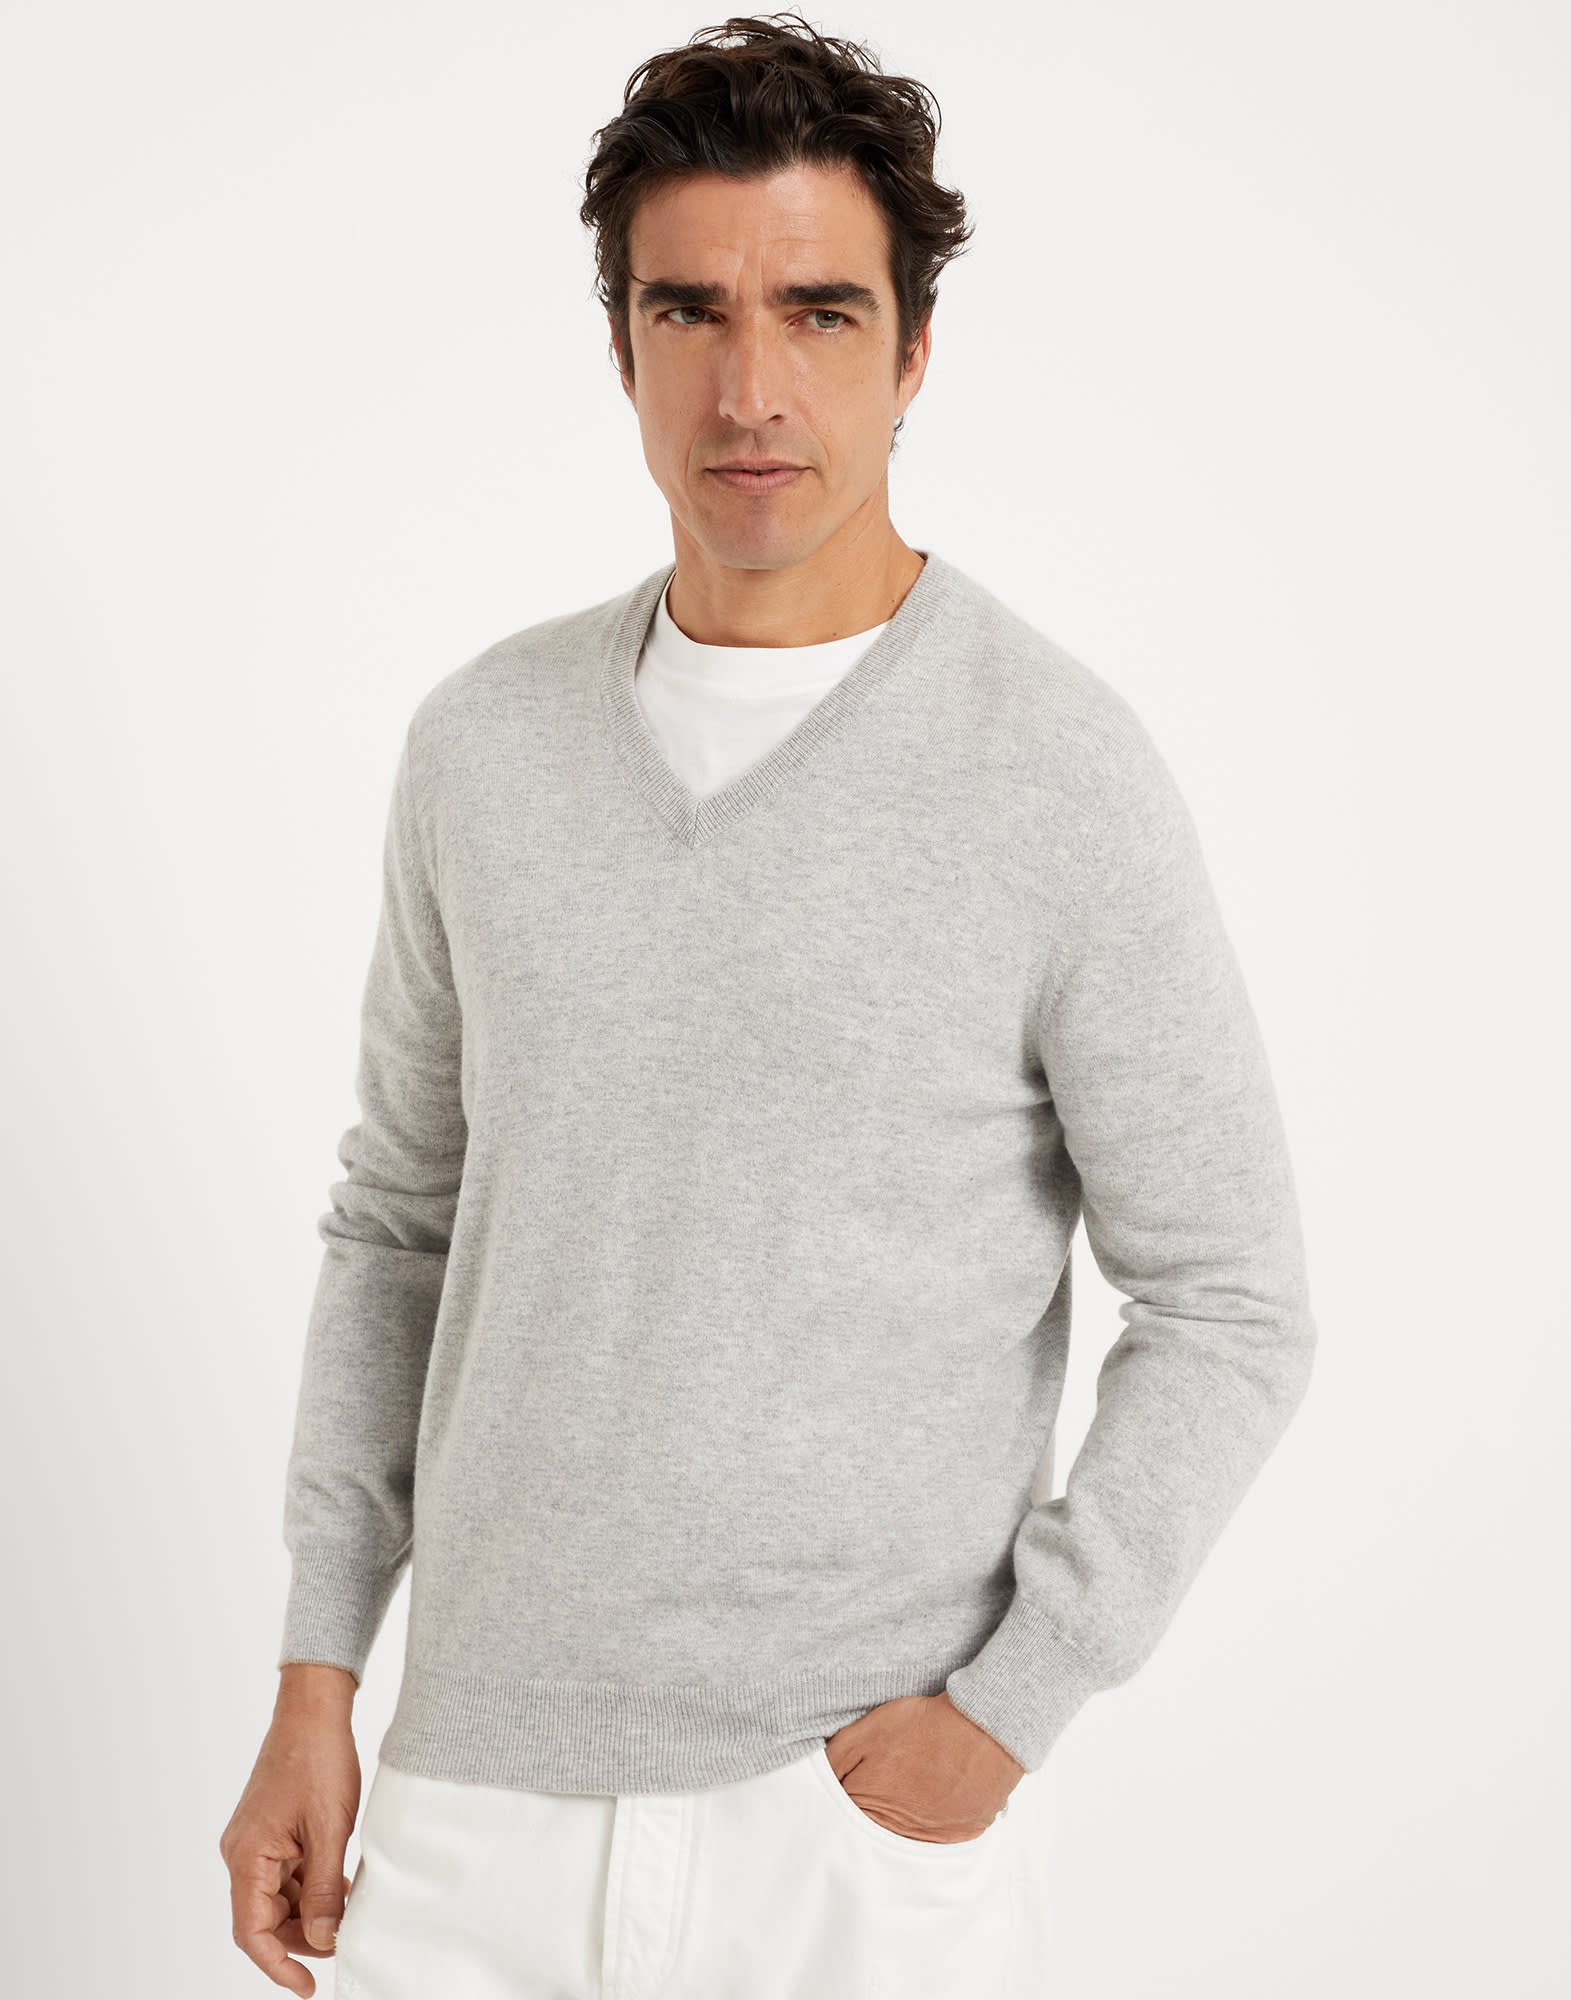 Brunello Cucinelli - Clay Cashmere Elbow Patch V-Neck Sweater